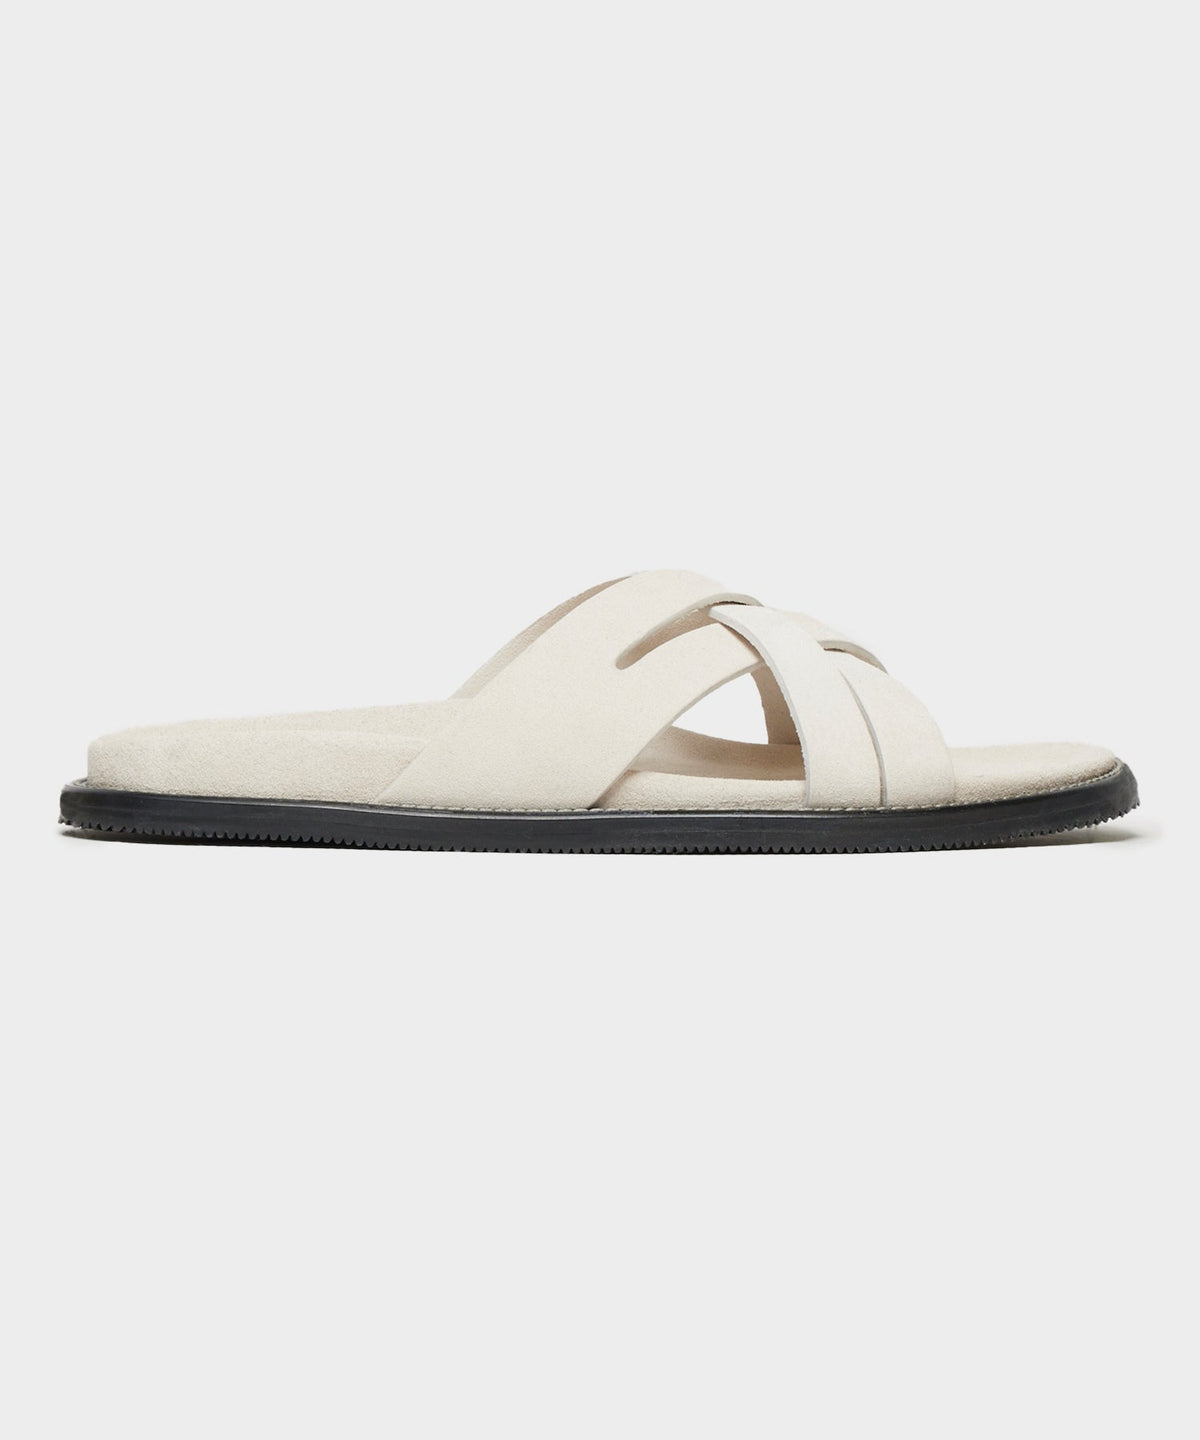 Nomad Suede Multi-Cross Sandal in Ivory